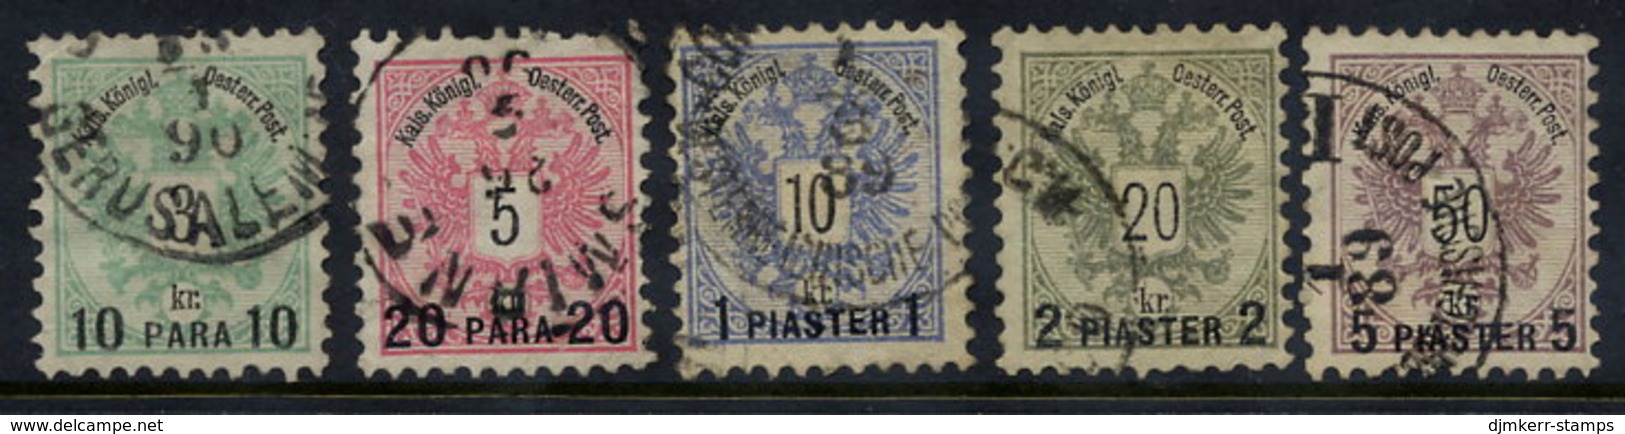 AUSTRIA PO In The LEVANT 1888 Surcharges On Arms Issue Used.  Michel 15-19 - Oostenrijkse Levant